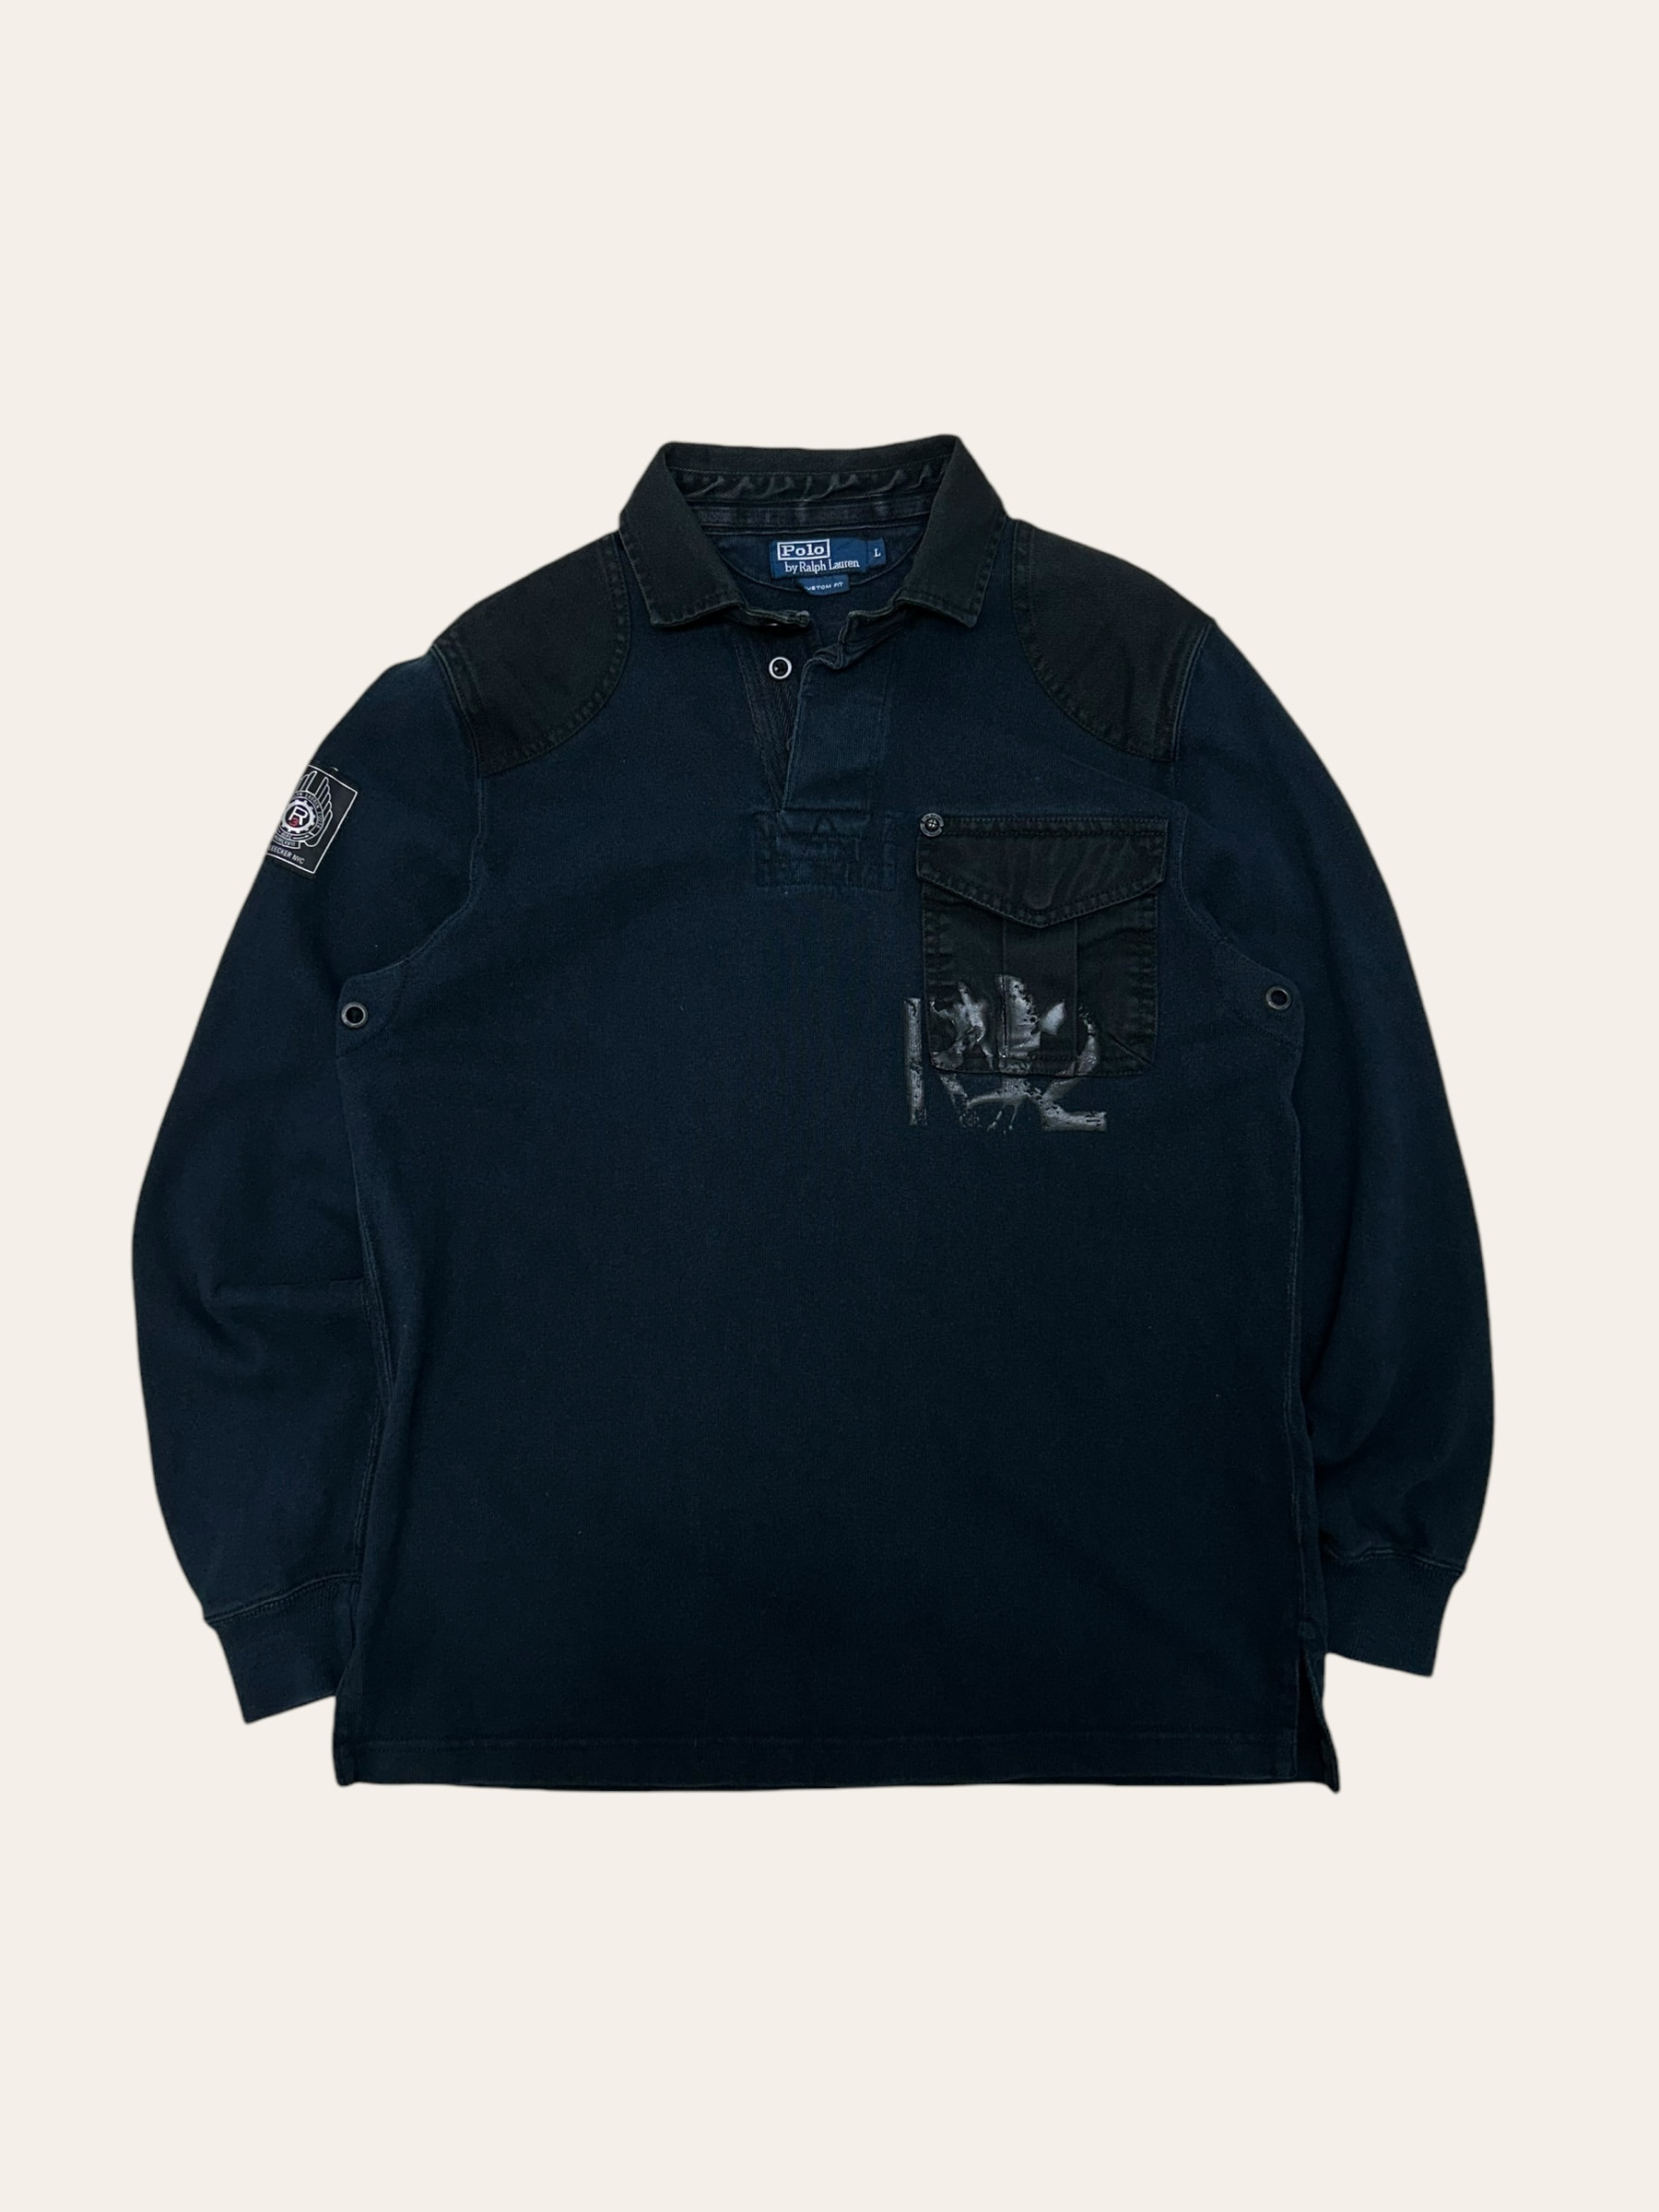 Polo ralph lauren black patched rugby shirt L